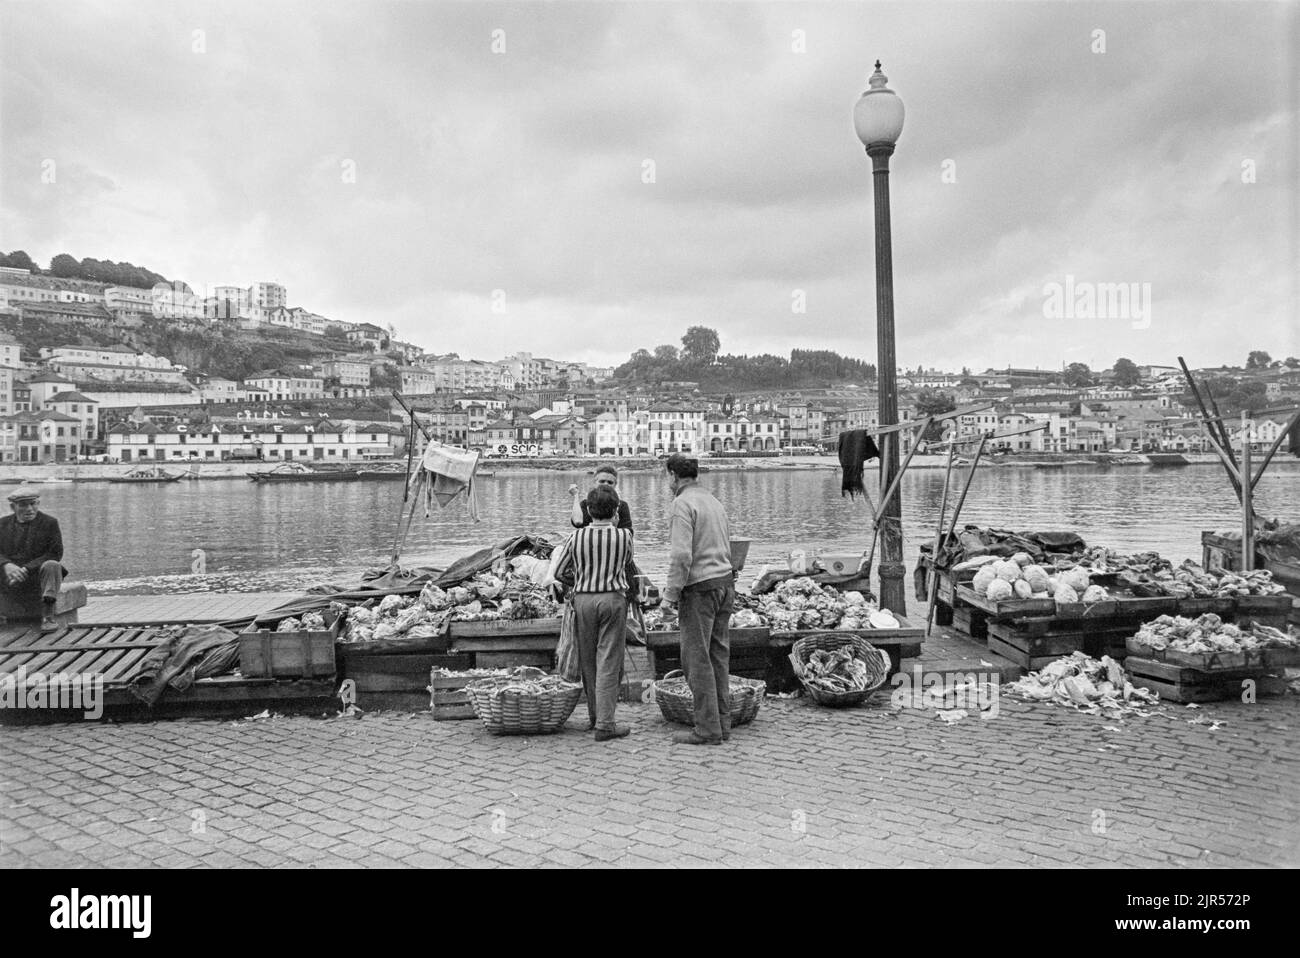 PORTUGAL - PORTO -  1970. A market by the river Douro in the Ribeira district of Porto, Northern Portugal.  Copyright Photograph: by Peter Eastland. Stock Photo